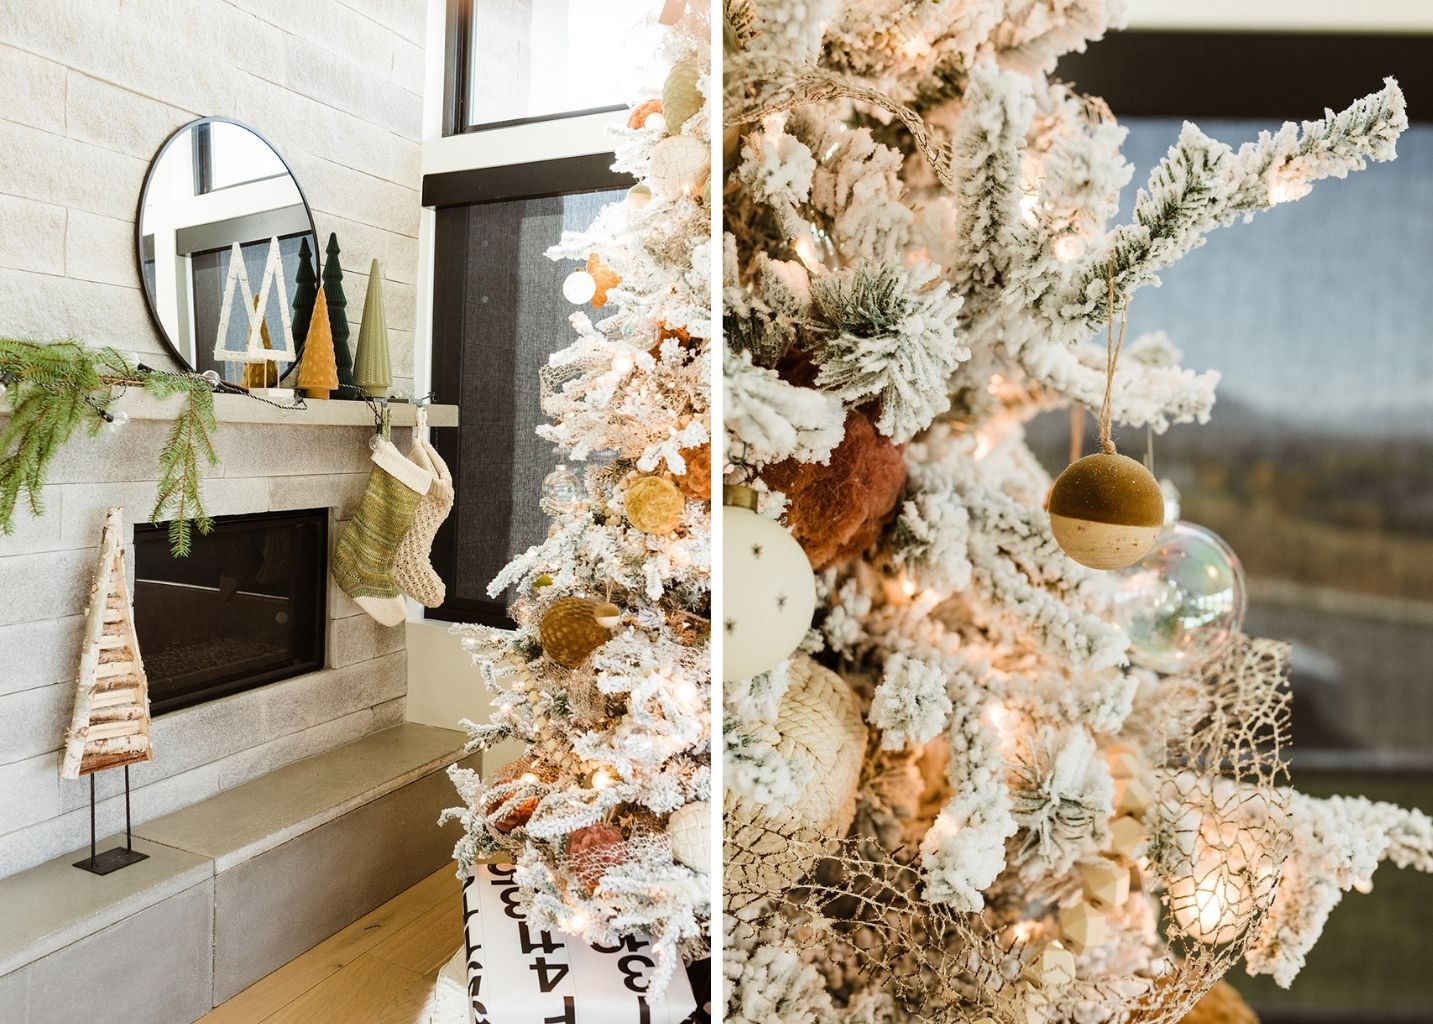 christmas decor inspiration for every room of your home